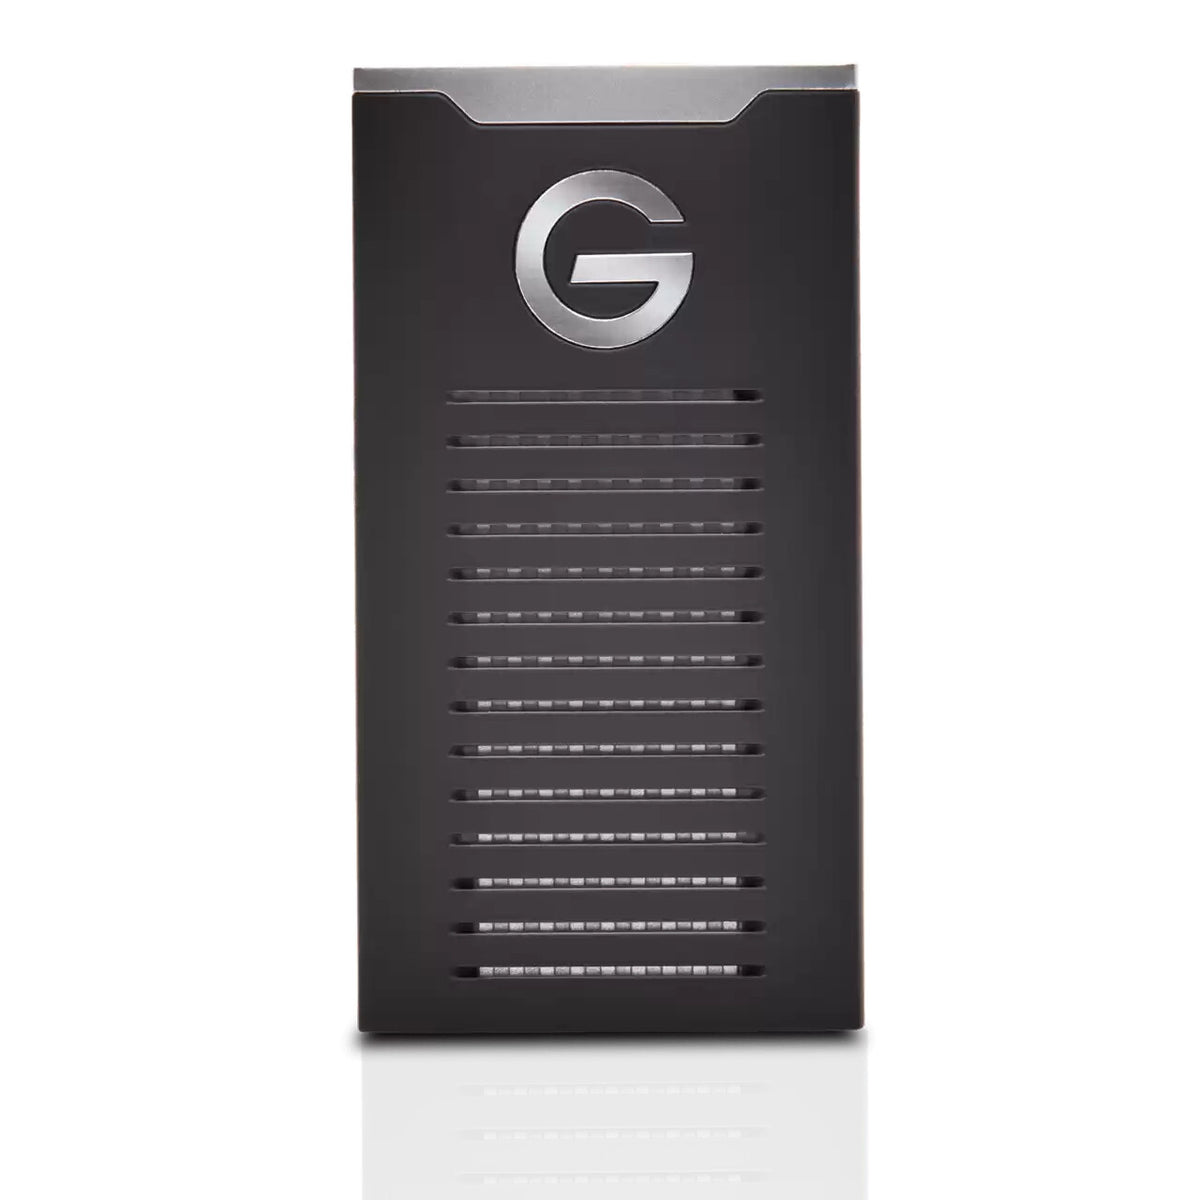 SanDisk G-DRIVE External solid state drive - 1 TB